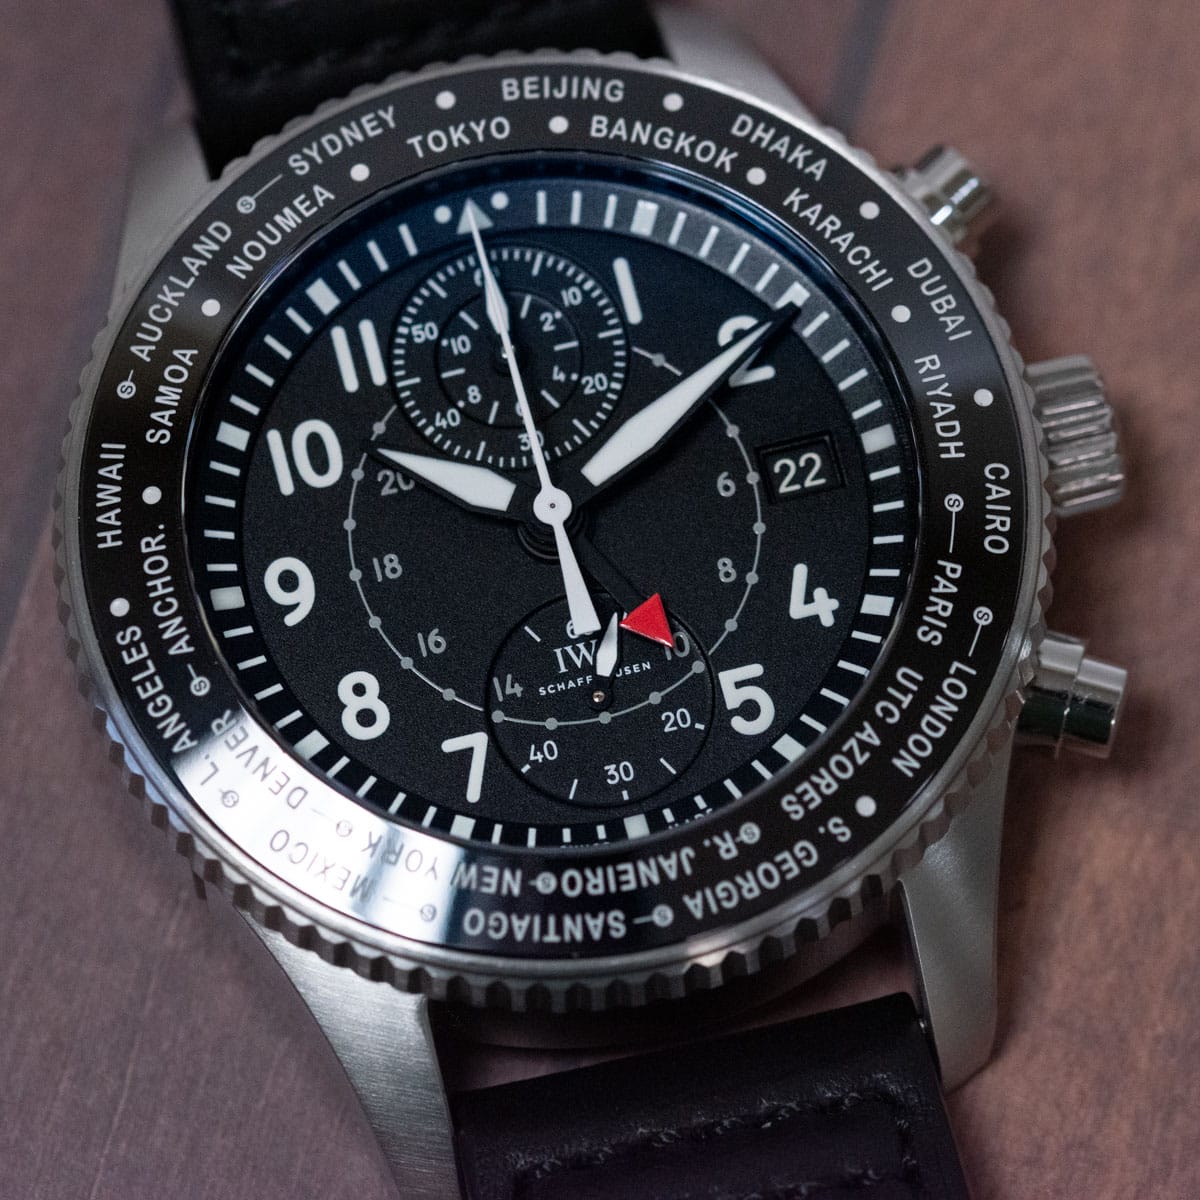 Stylied photo of  of Timezoner Chronograph